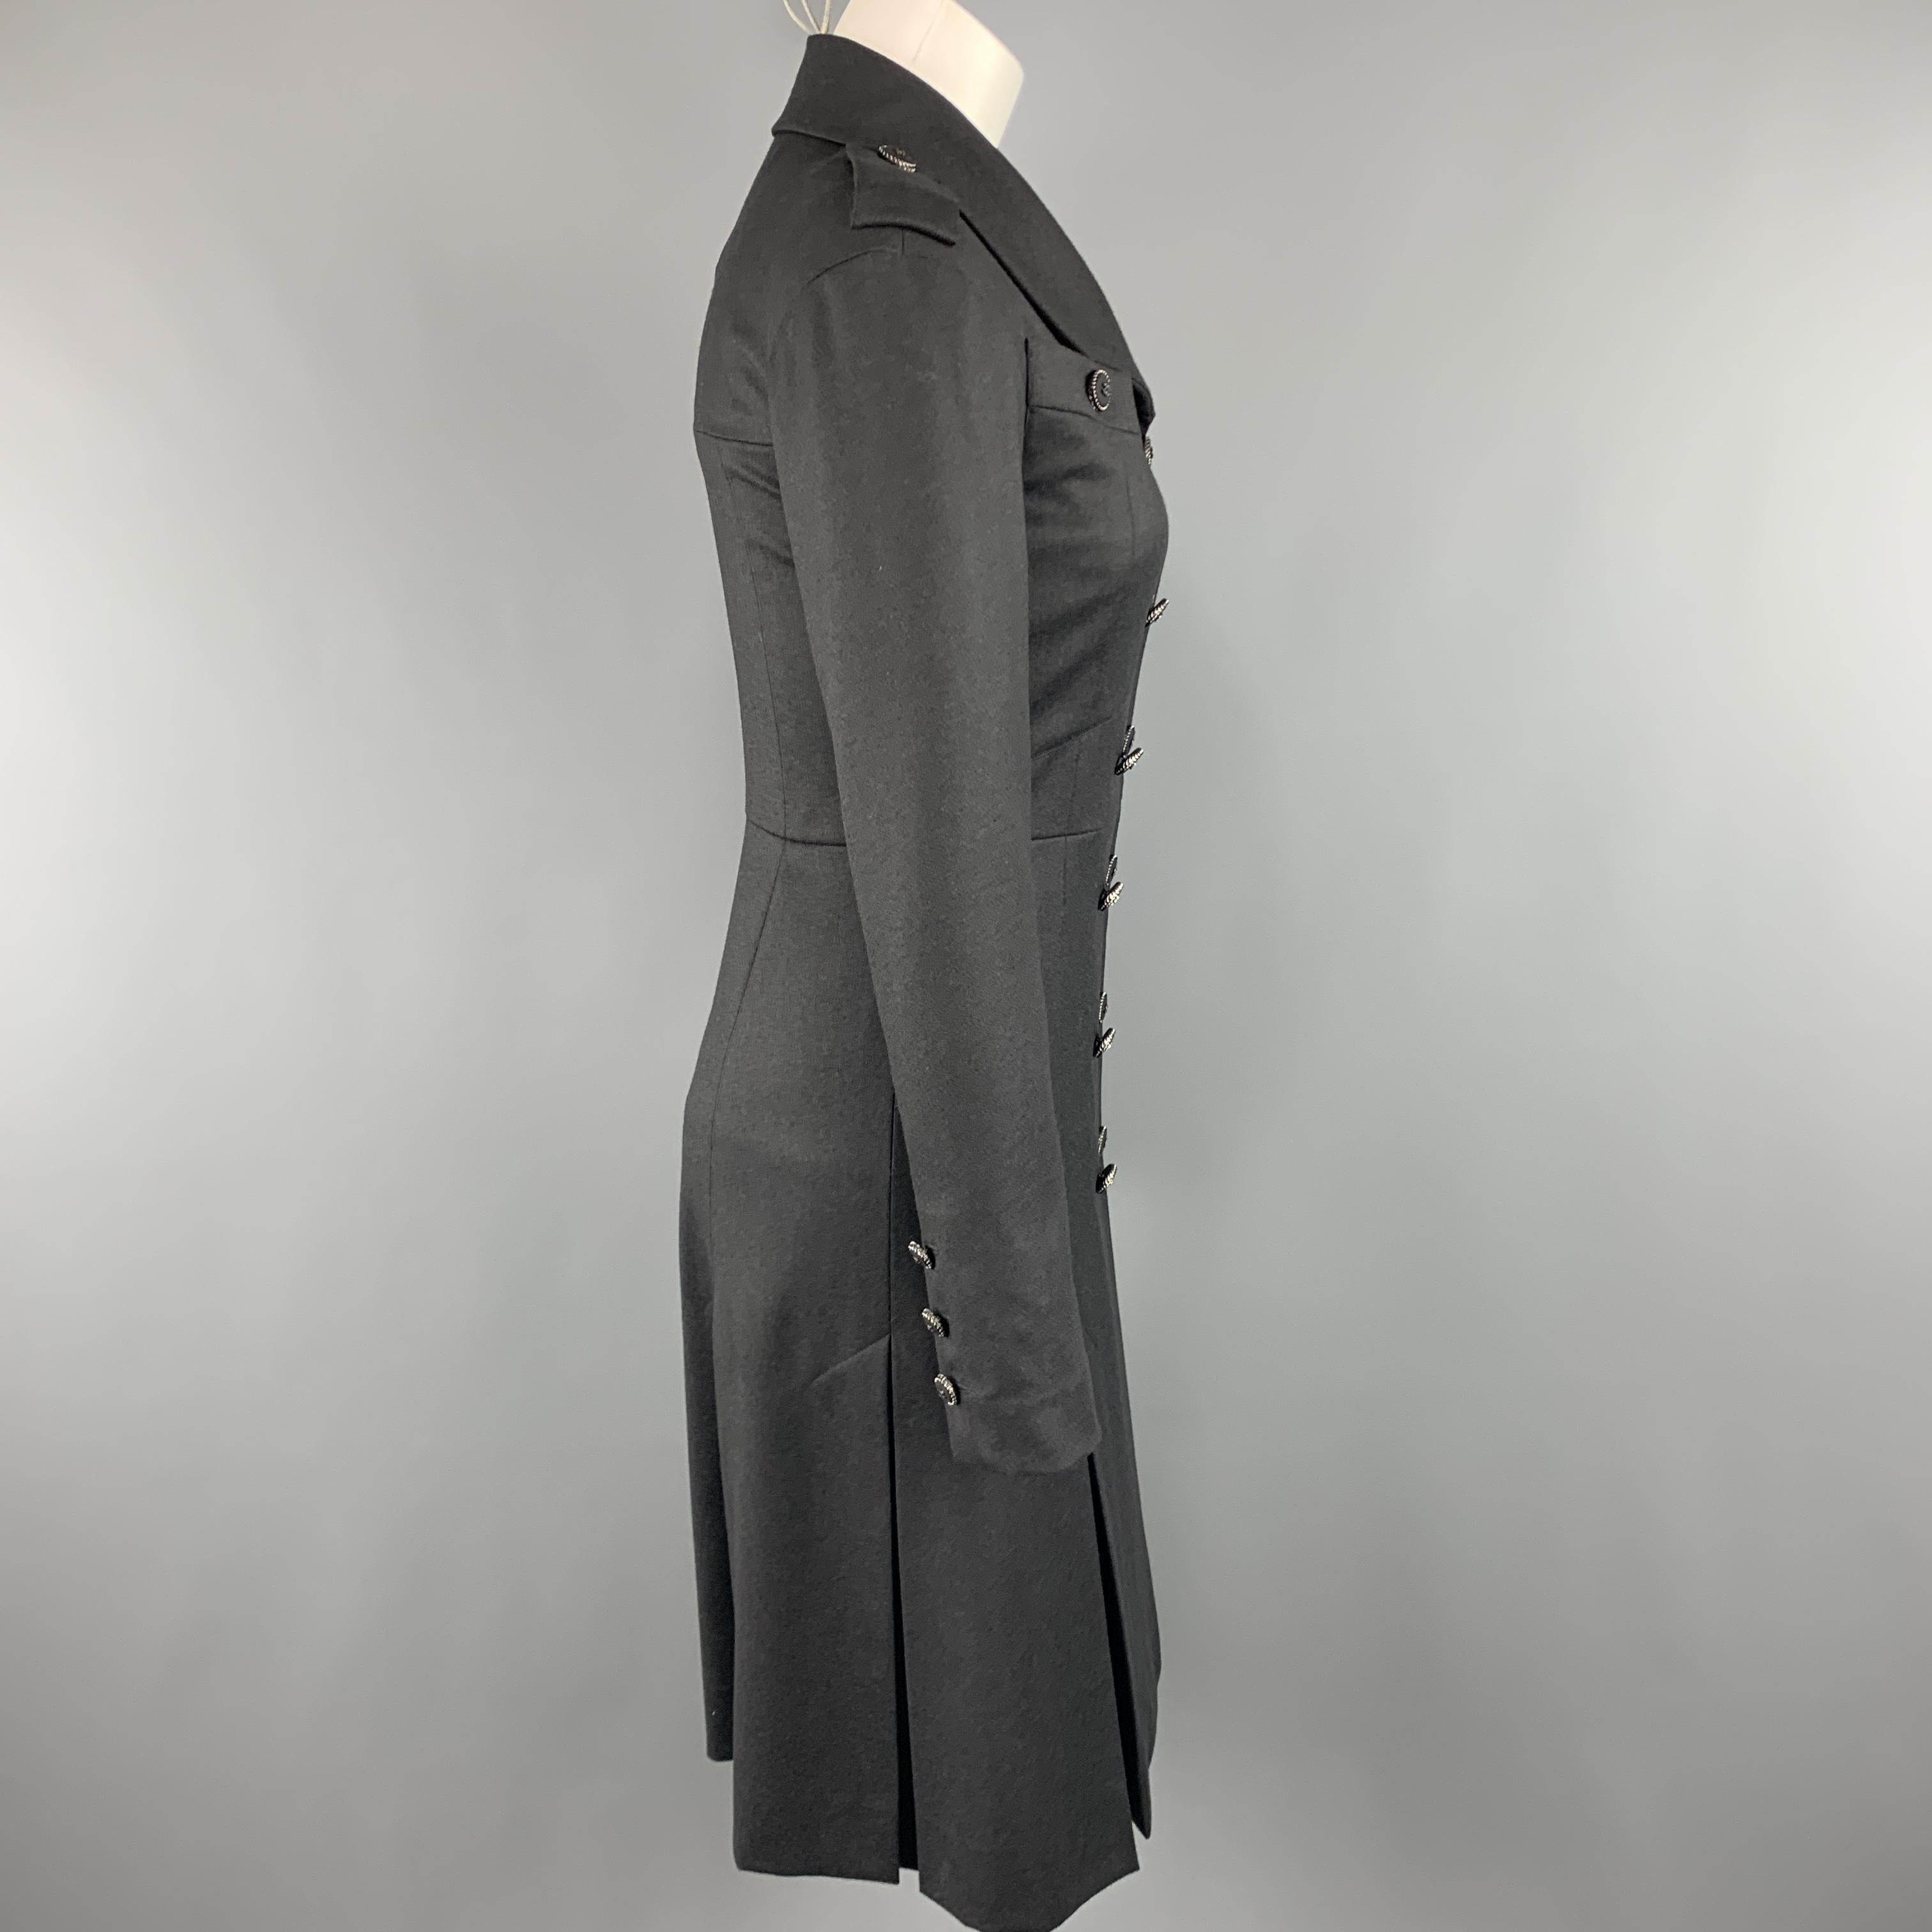 CHANEL Size 2 Grey Wool / Cashmere Double Breasted Epaulet CC Button Coat 1